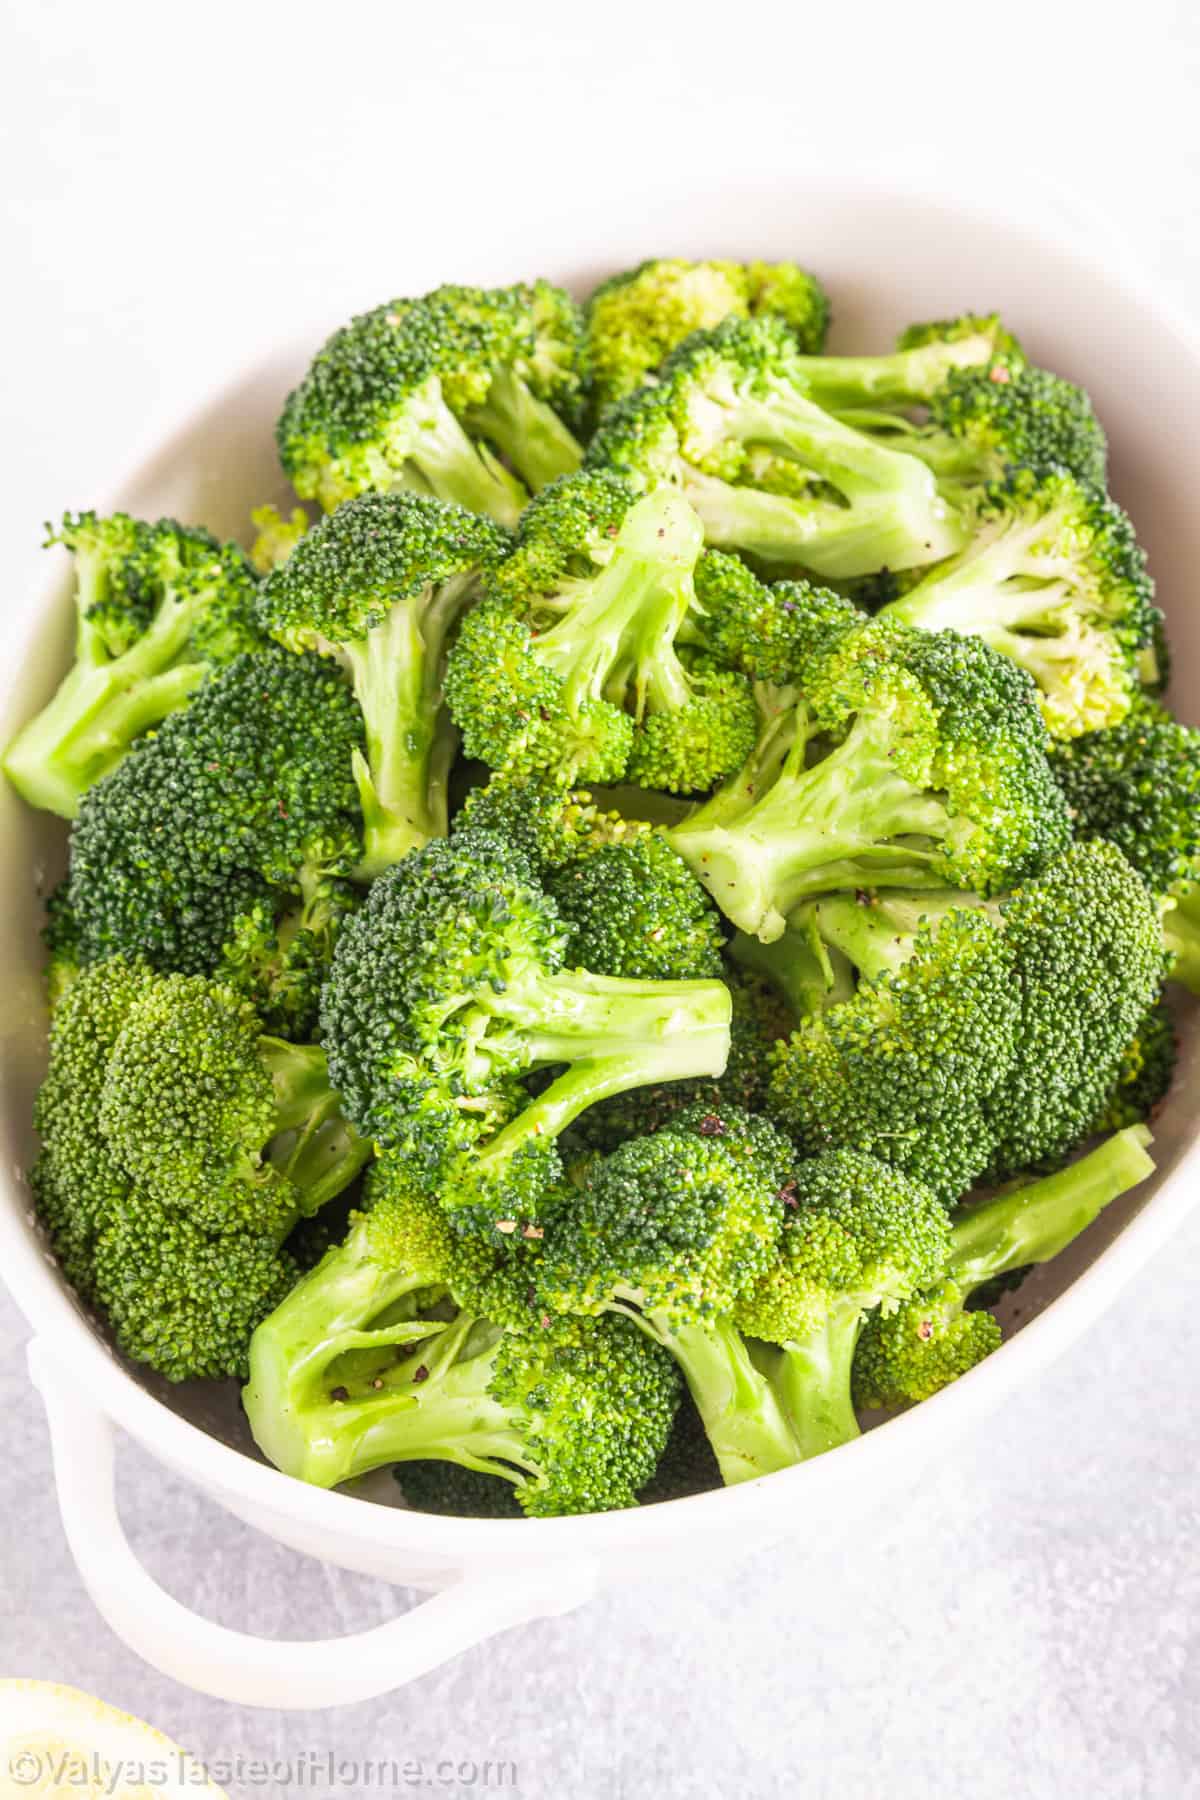 Steamed broccoli is a simple, wholesome dish that can be effortlessly made at home. It is a versatile side dish that pairs well with a variety of proteins like chicken and cheese.